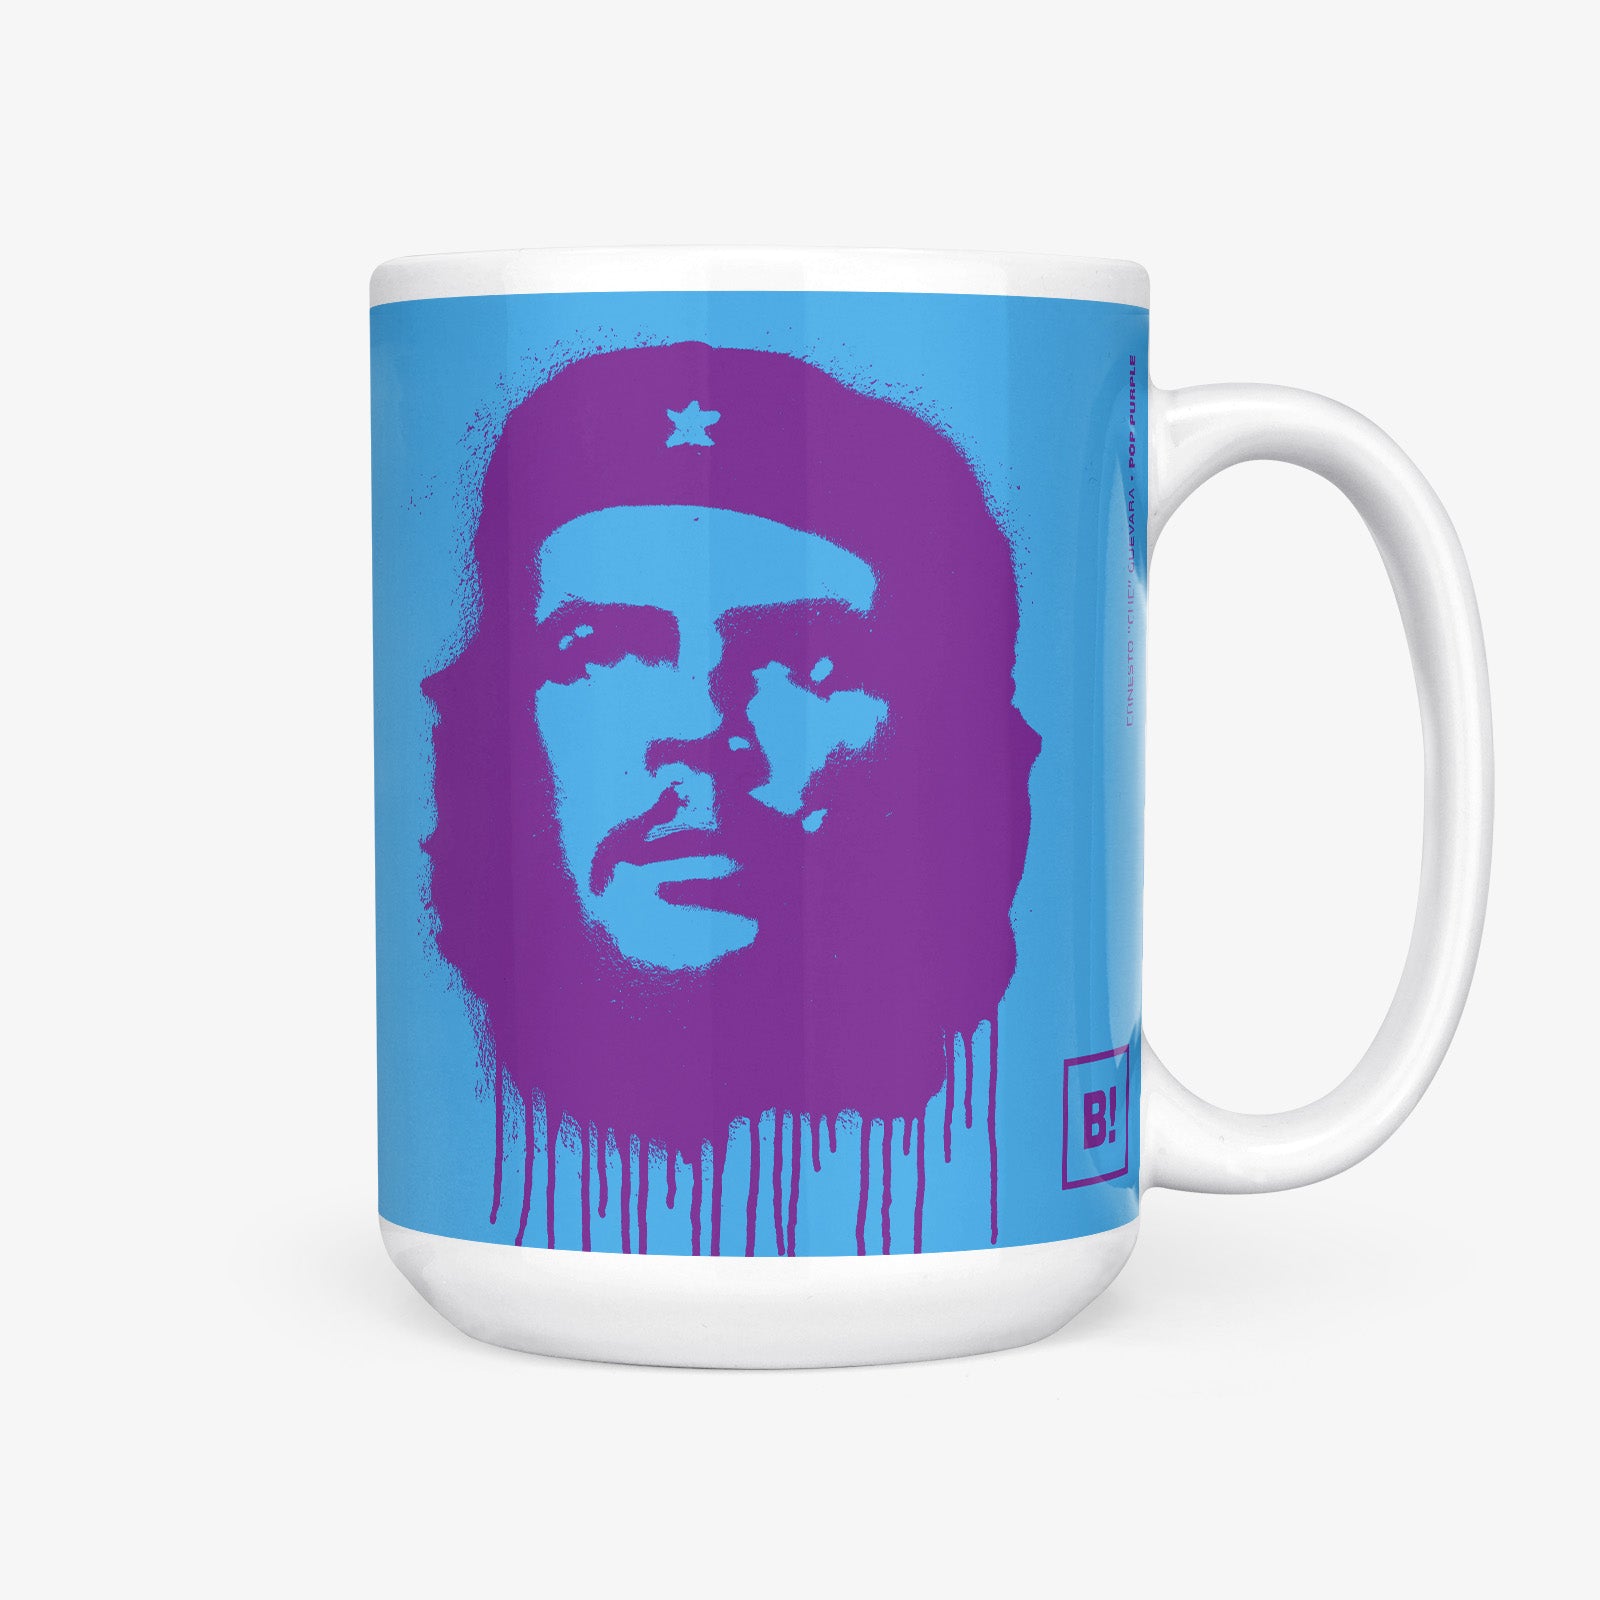 Be inspired by our "Ernesto Che Guevara" Pop Purple Coffee Mug. Featuring a 15oz size with the handle on the right.